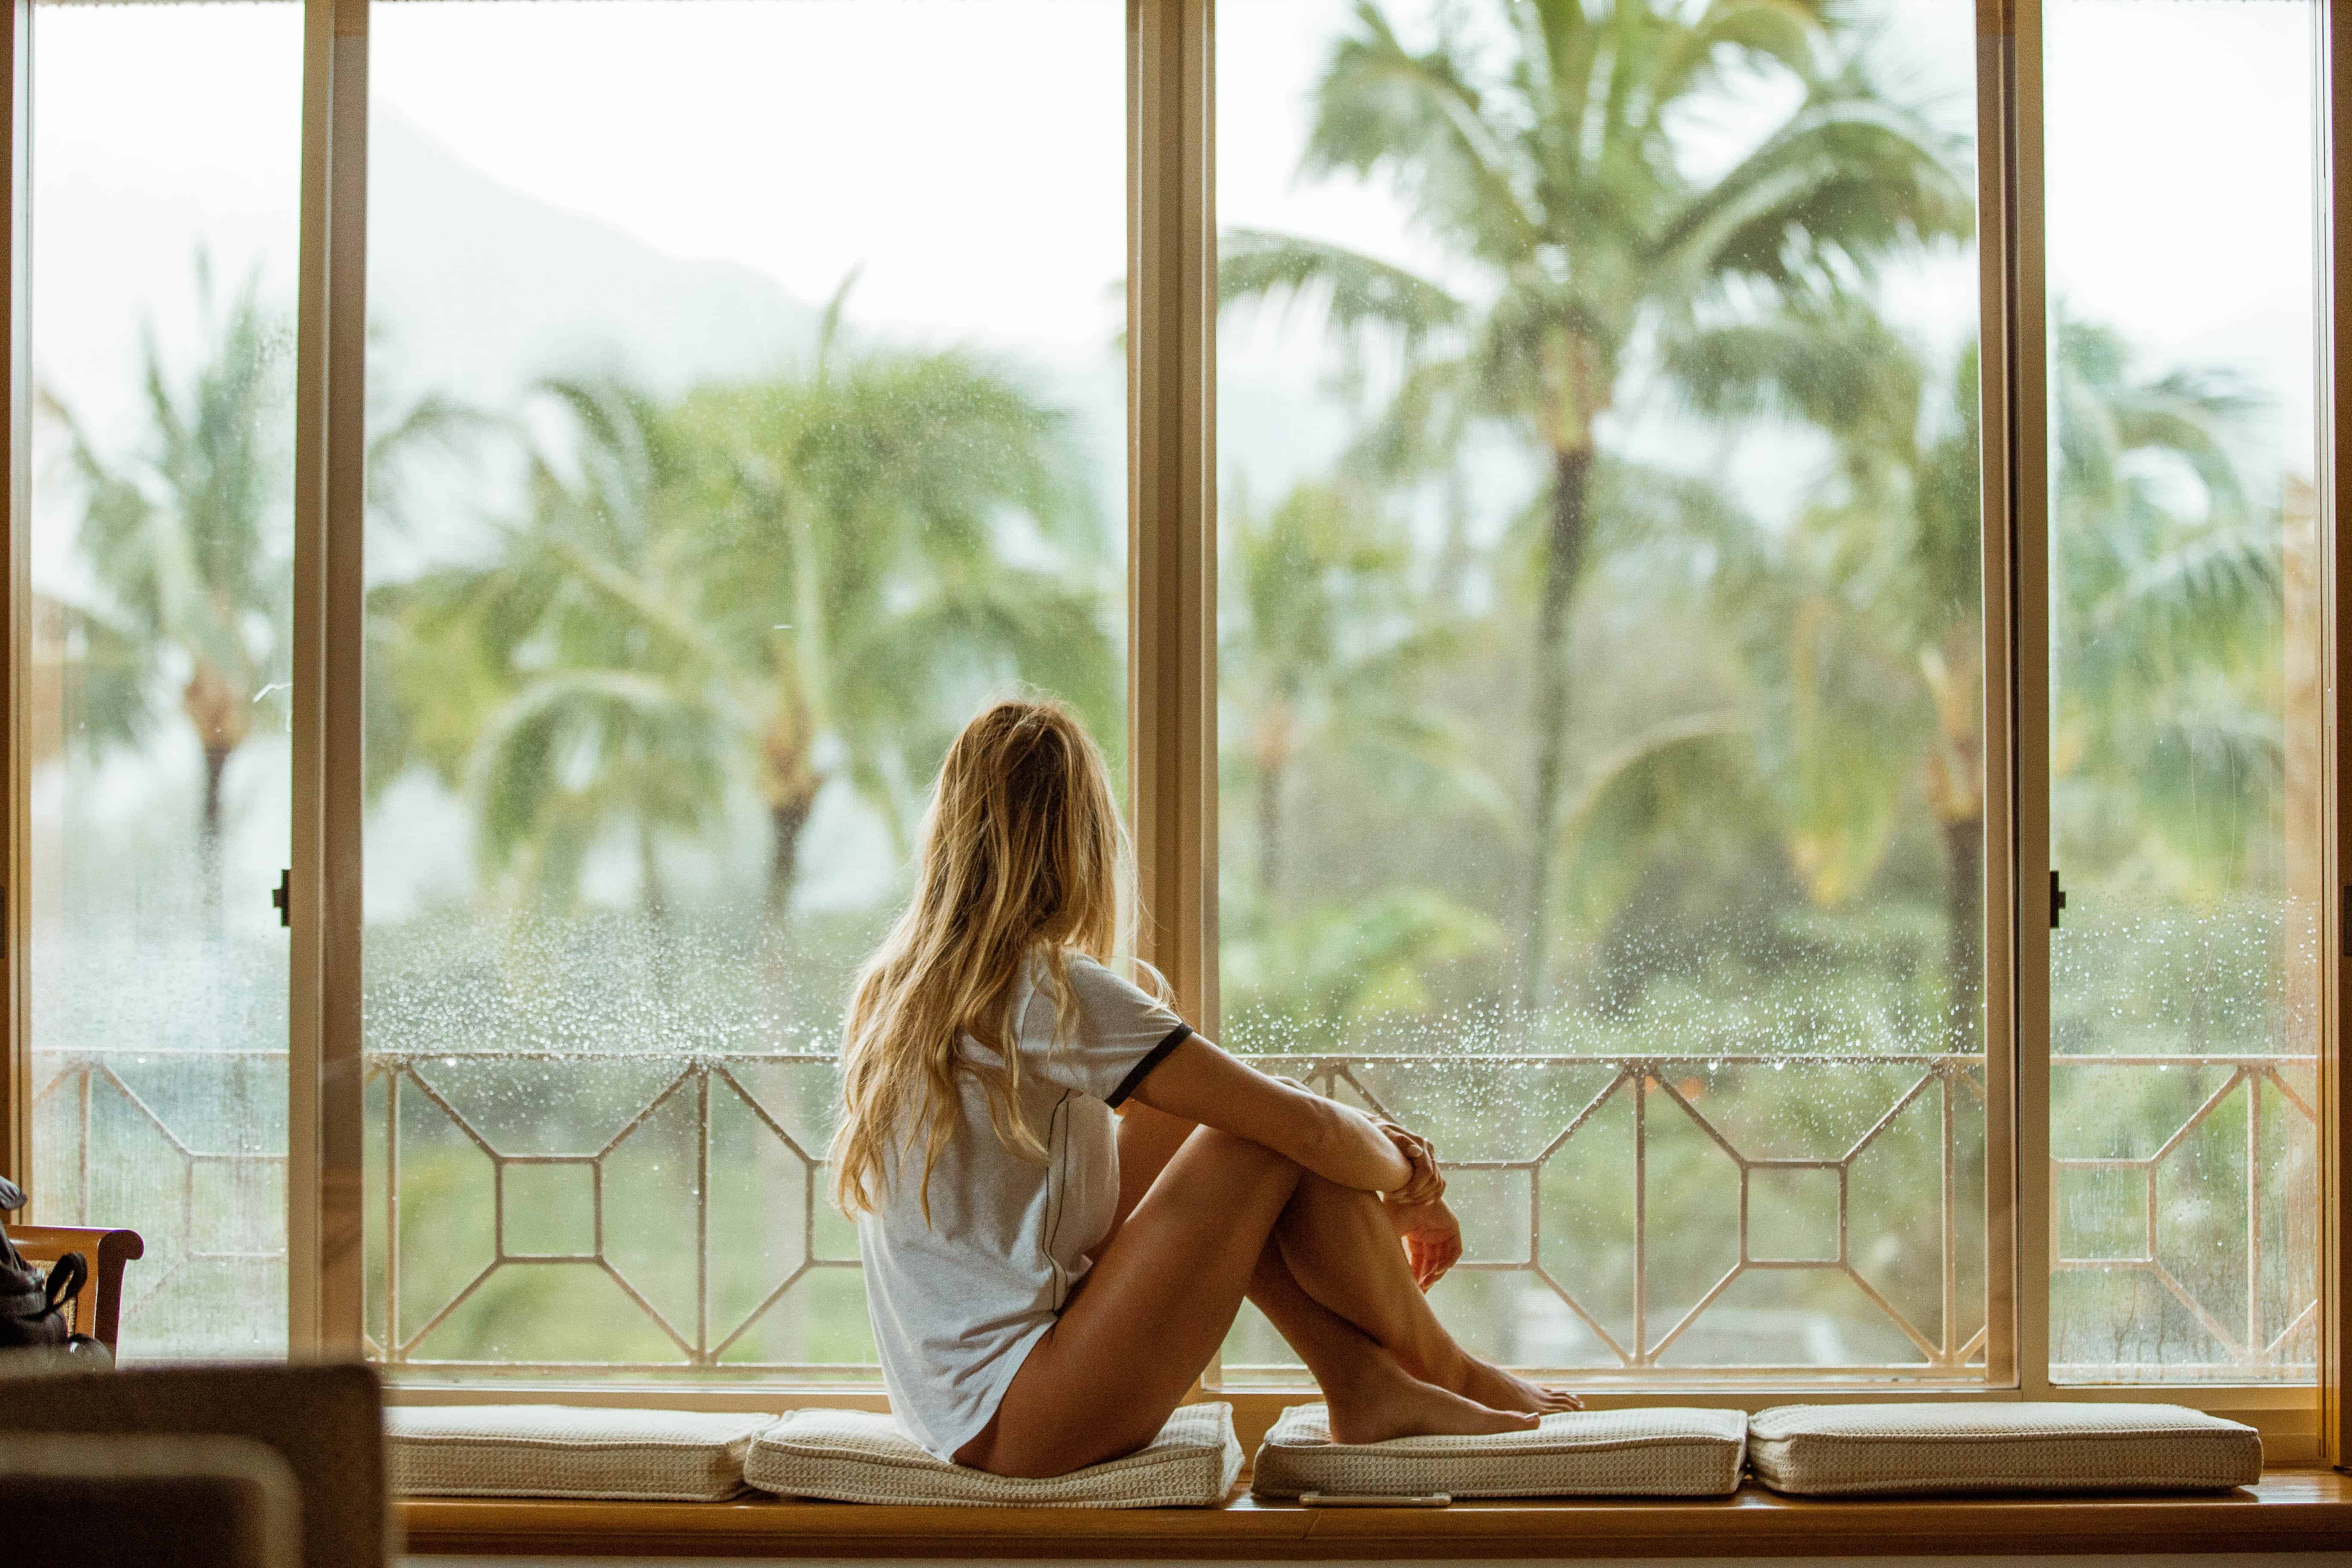 woman looking out windows with palm trees in the distance